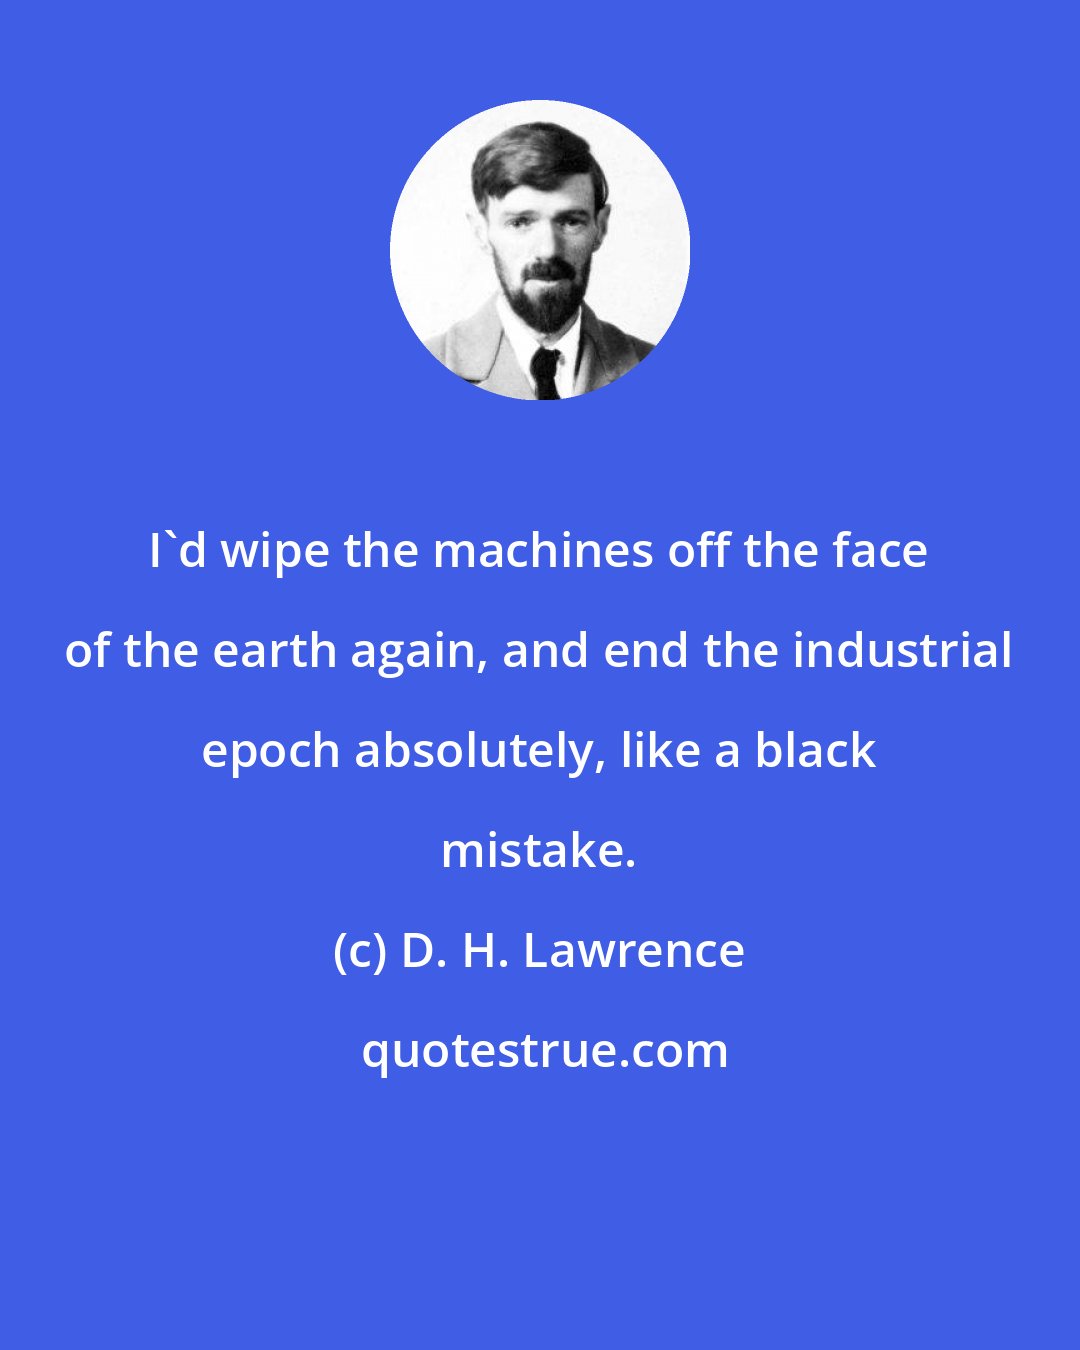 D. H. Lawrence: I'd wipe the machines off the face of the earth again, and end the industrial epoch absolutely, like a black mistake.